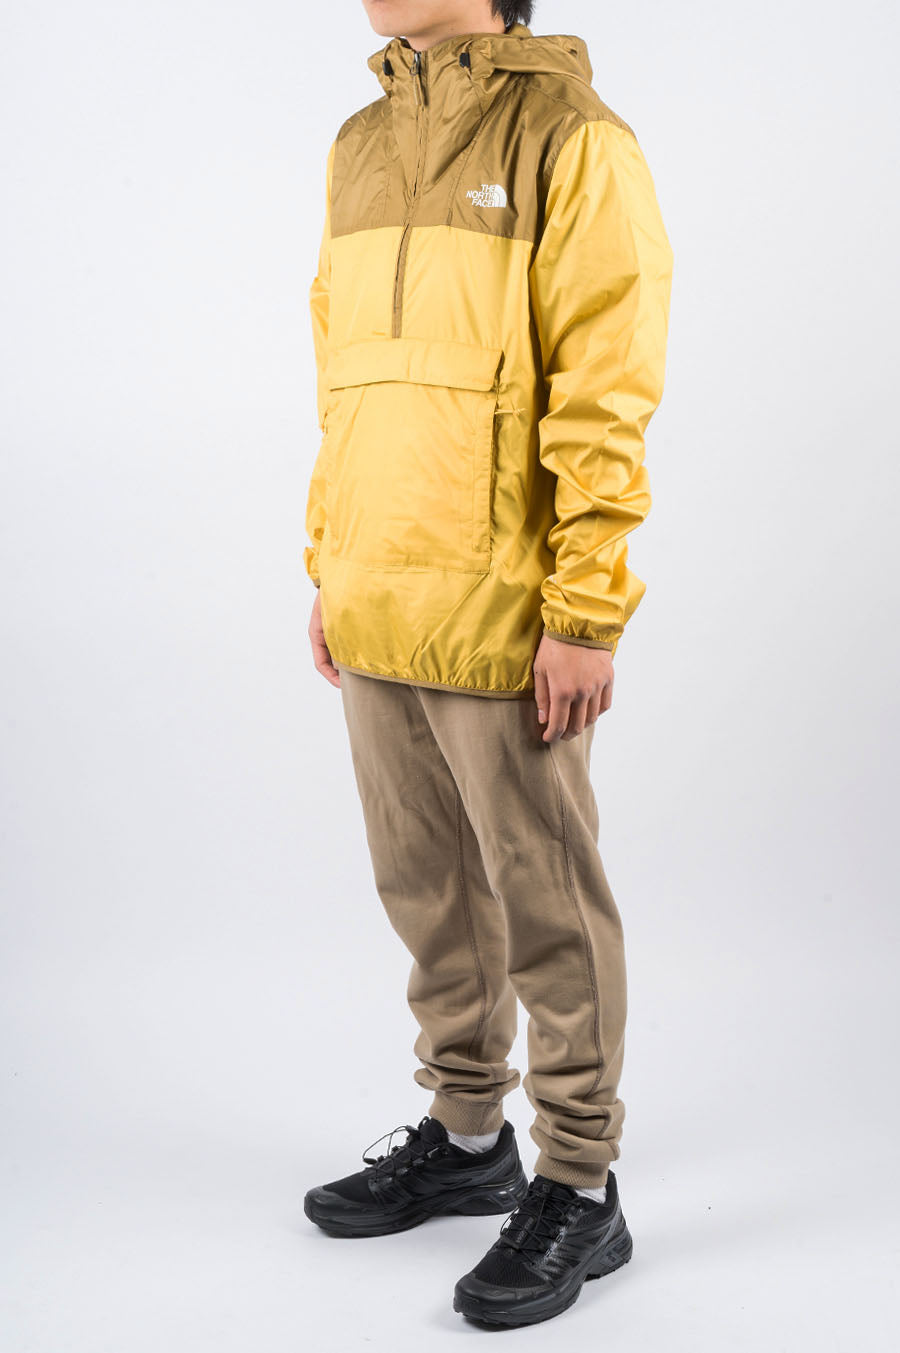 THE NORTH FACE FANORAK BAMBOO YELLOW - BLENDS